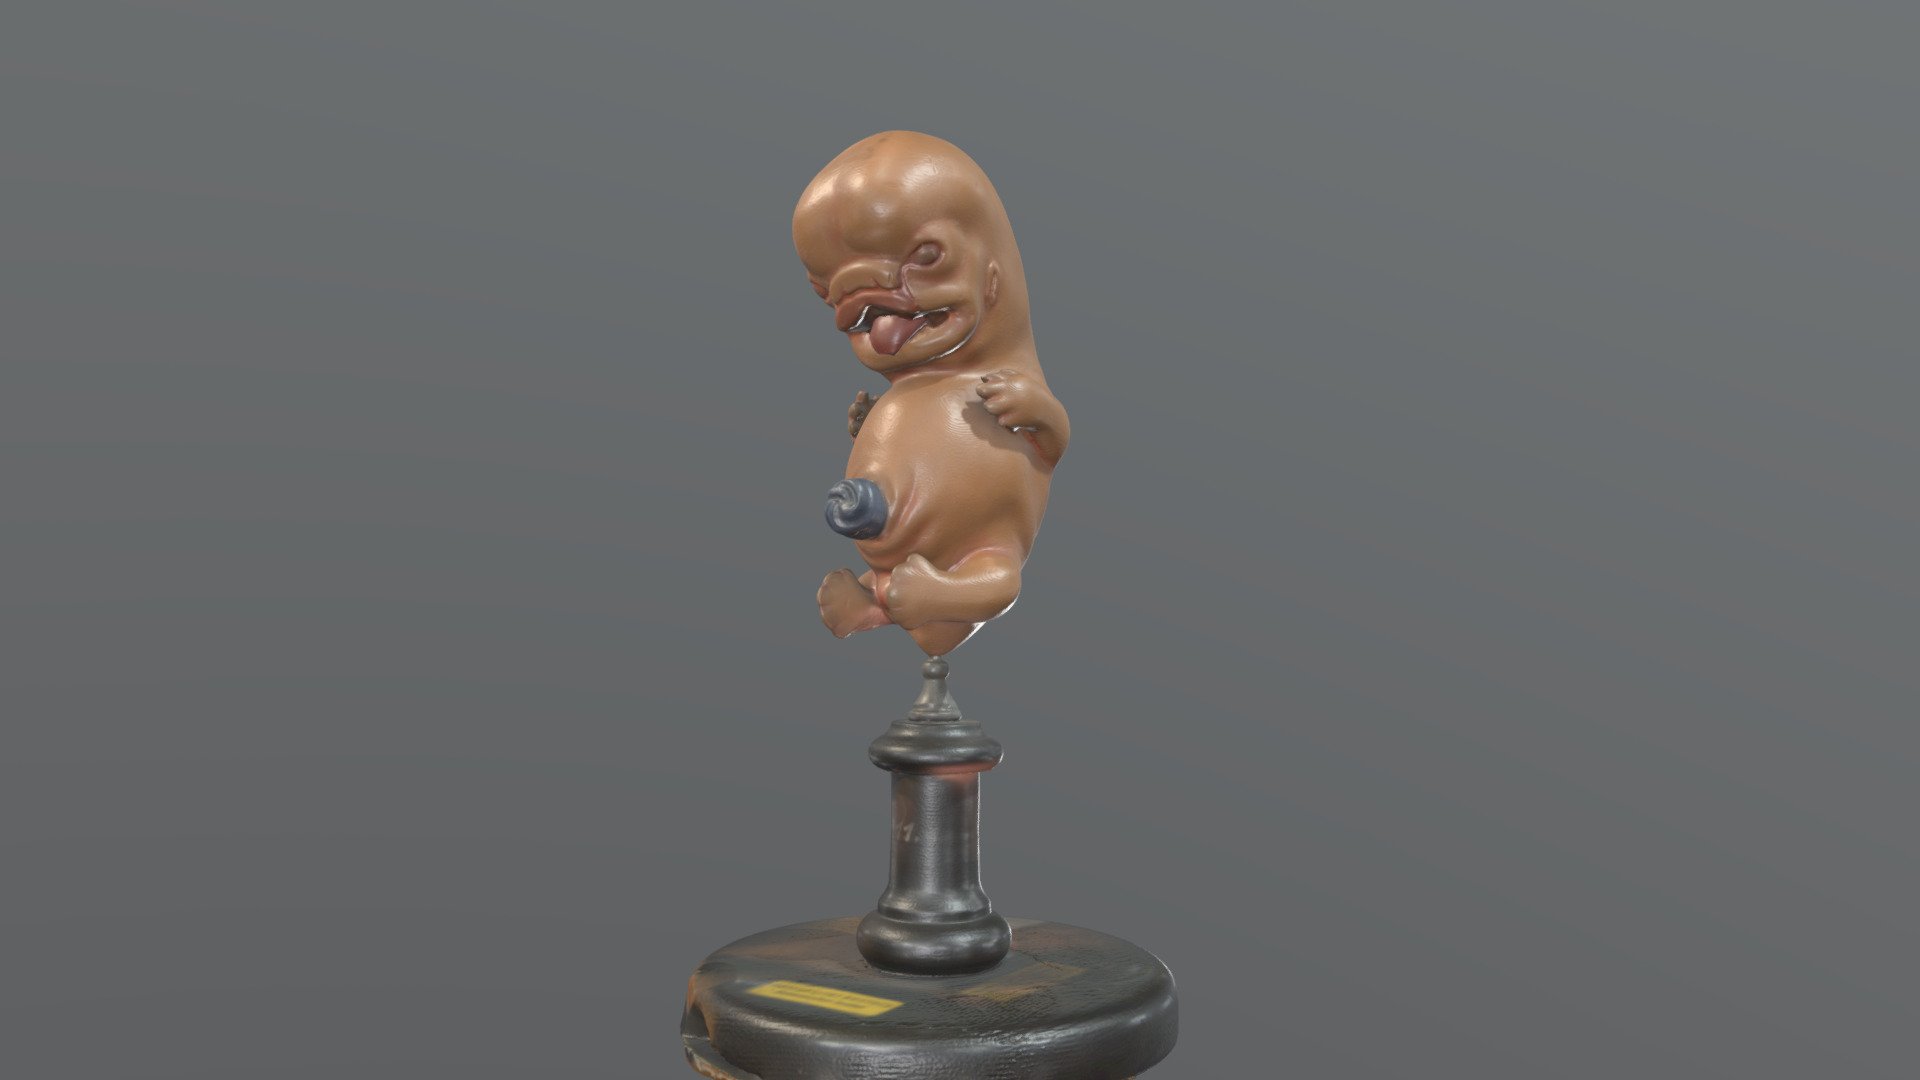 Historical wax model of an embryo in the approx. 6th week of pregnancy.
The model comes from the anatomical collection of the Rostock Institute of Anatomy - wax model embryo Institute of Anatomy Rostock - 3D model by Institute of Anatomy Rostock (@Alexander.Hawlitschka) 3d model